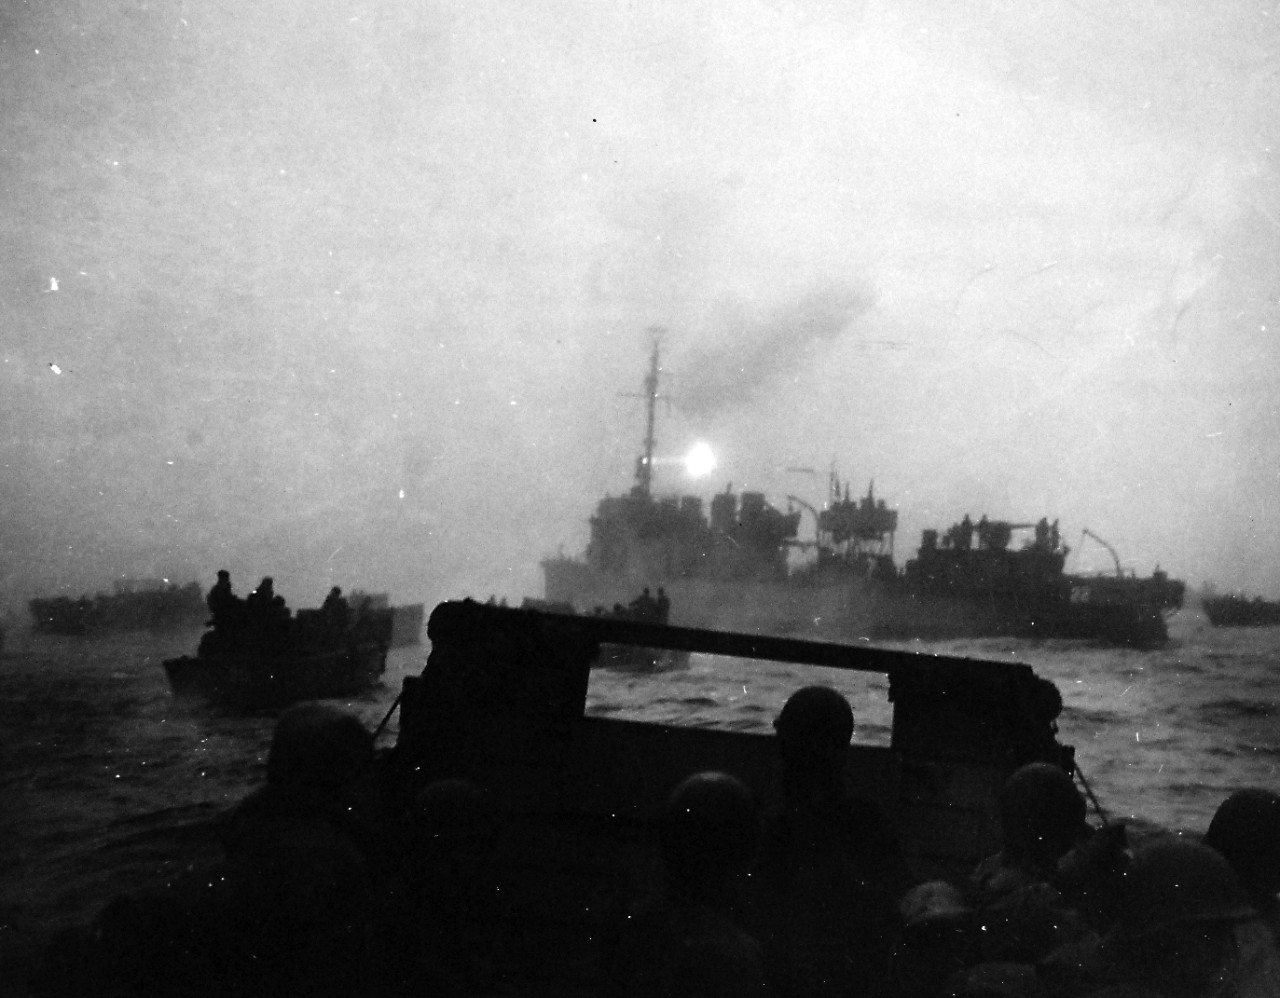 80-G-50816:    Aleutian Islands Campaign, June 1942 - August 1943.    Battle for Attu, May 1943.   USS Pruitt (DM-22) escorting landing boats from USS Heywood (APA-6) to the beach of Massacre Bay, Attu, Aleutian Islands, May 11th, 1943.   Pruitt guided the boat 9 miles through the fog by use of her radar and searchlights.   U.S. Navy Photograph, now in the collections of the National Archives.  (2016/05/10).